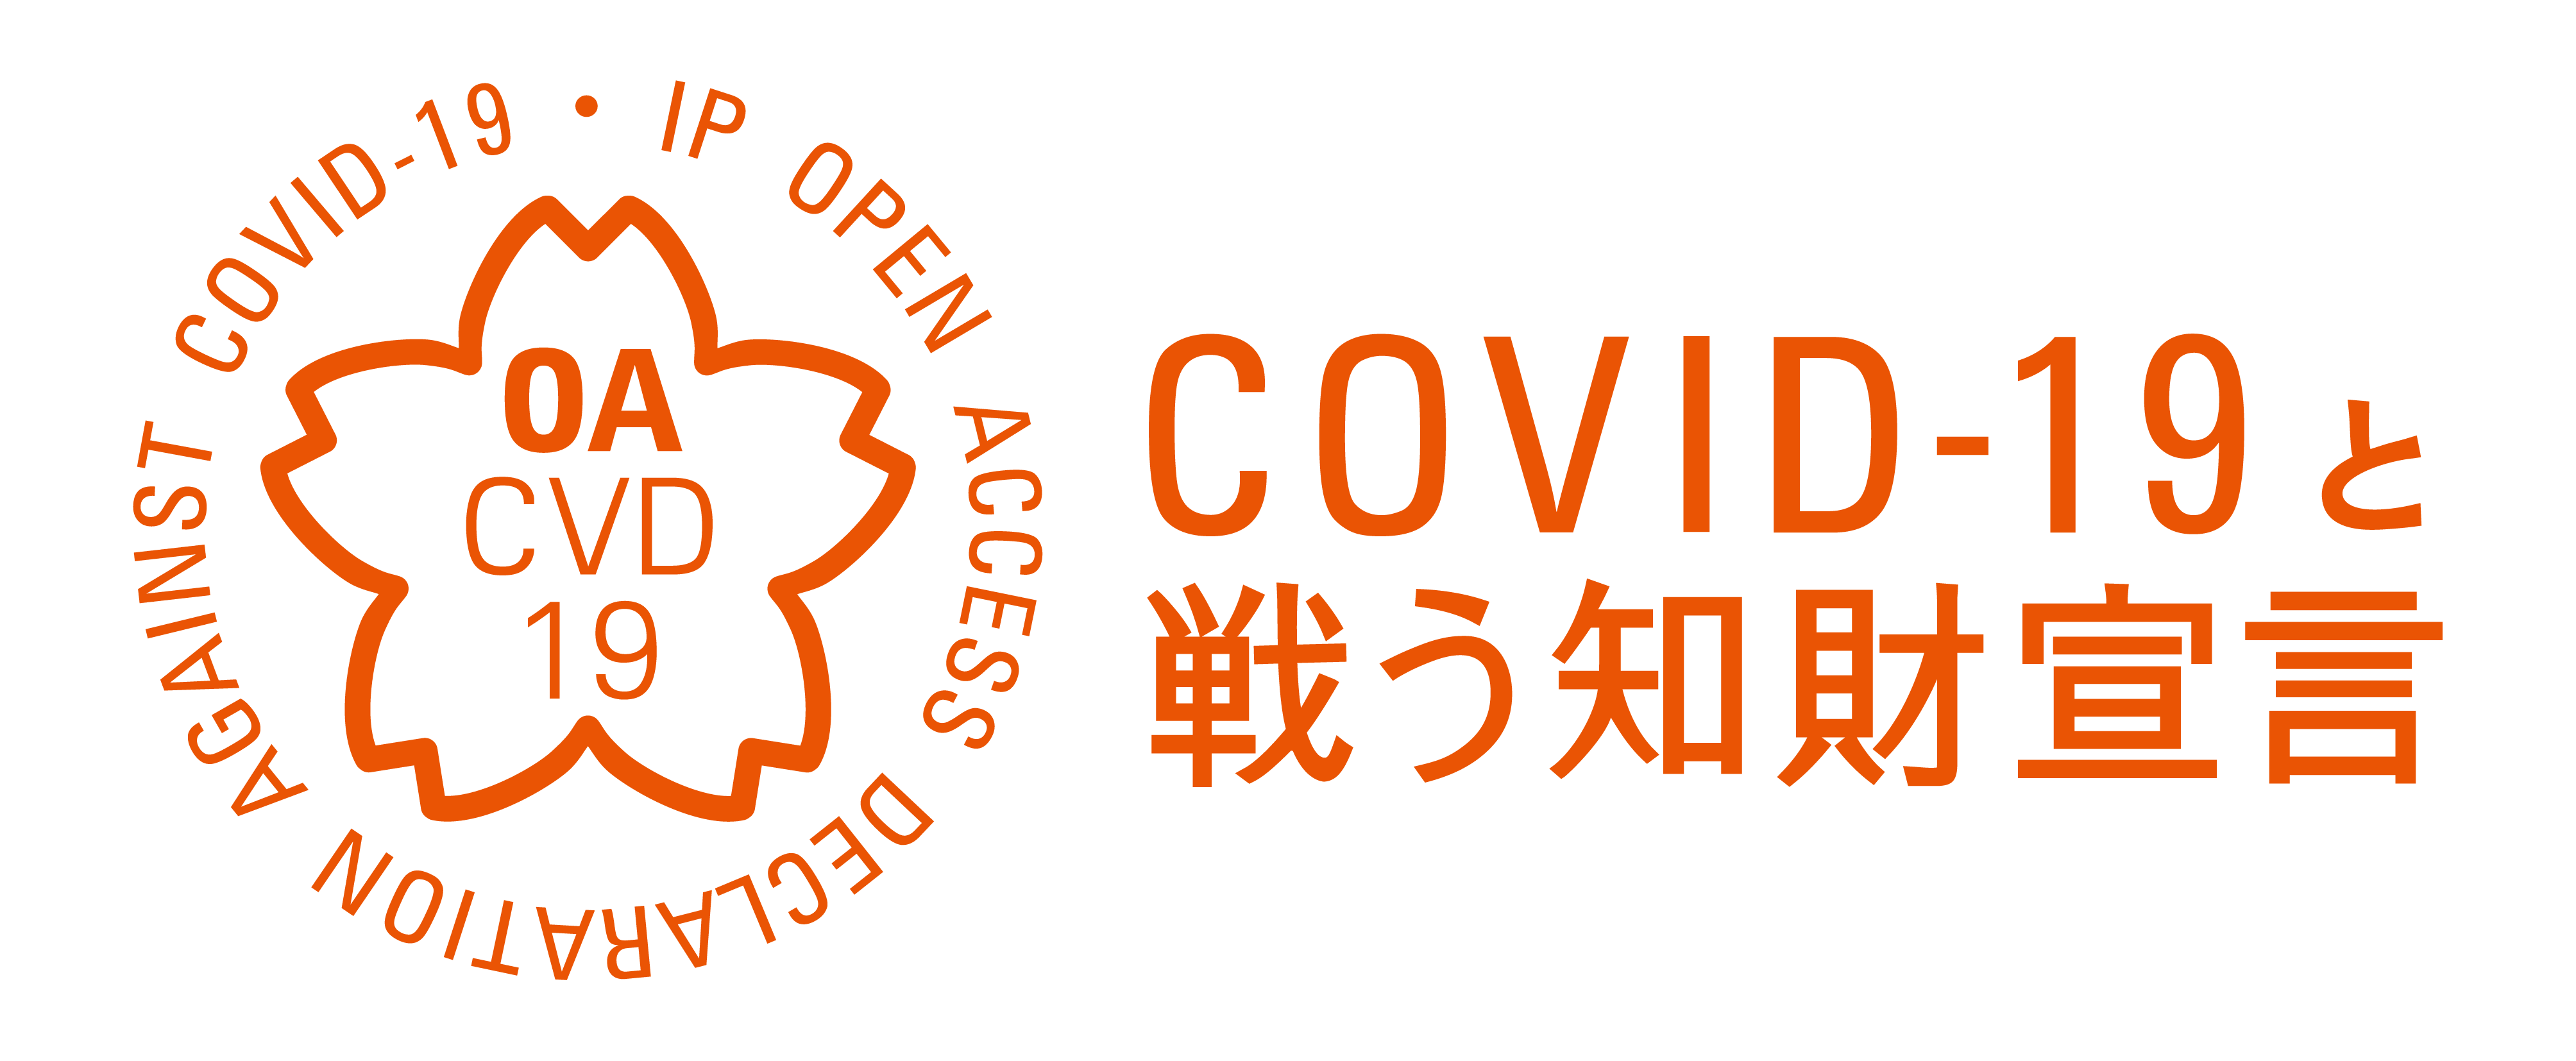 IP OPEN ACCESS DECLARATION AGAINST COVID-19